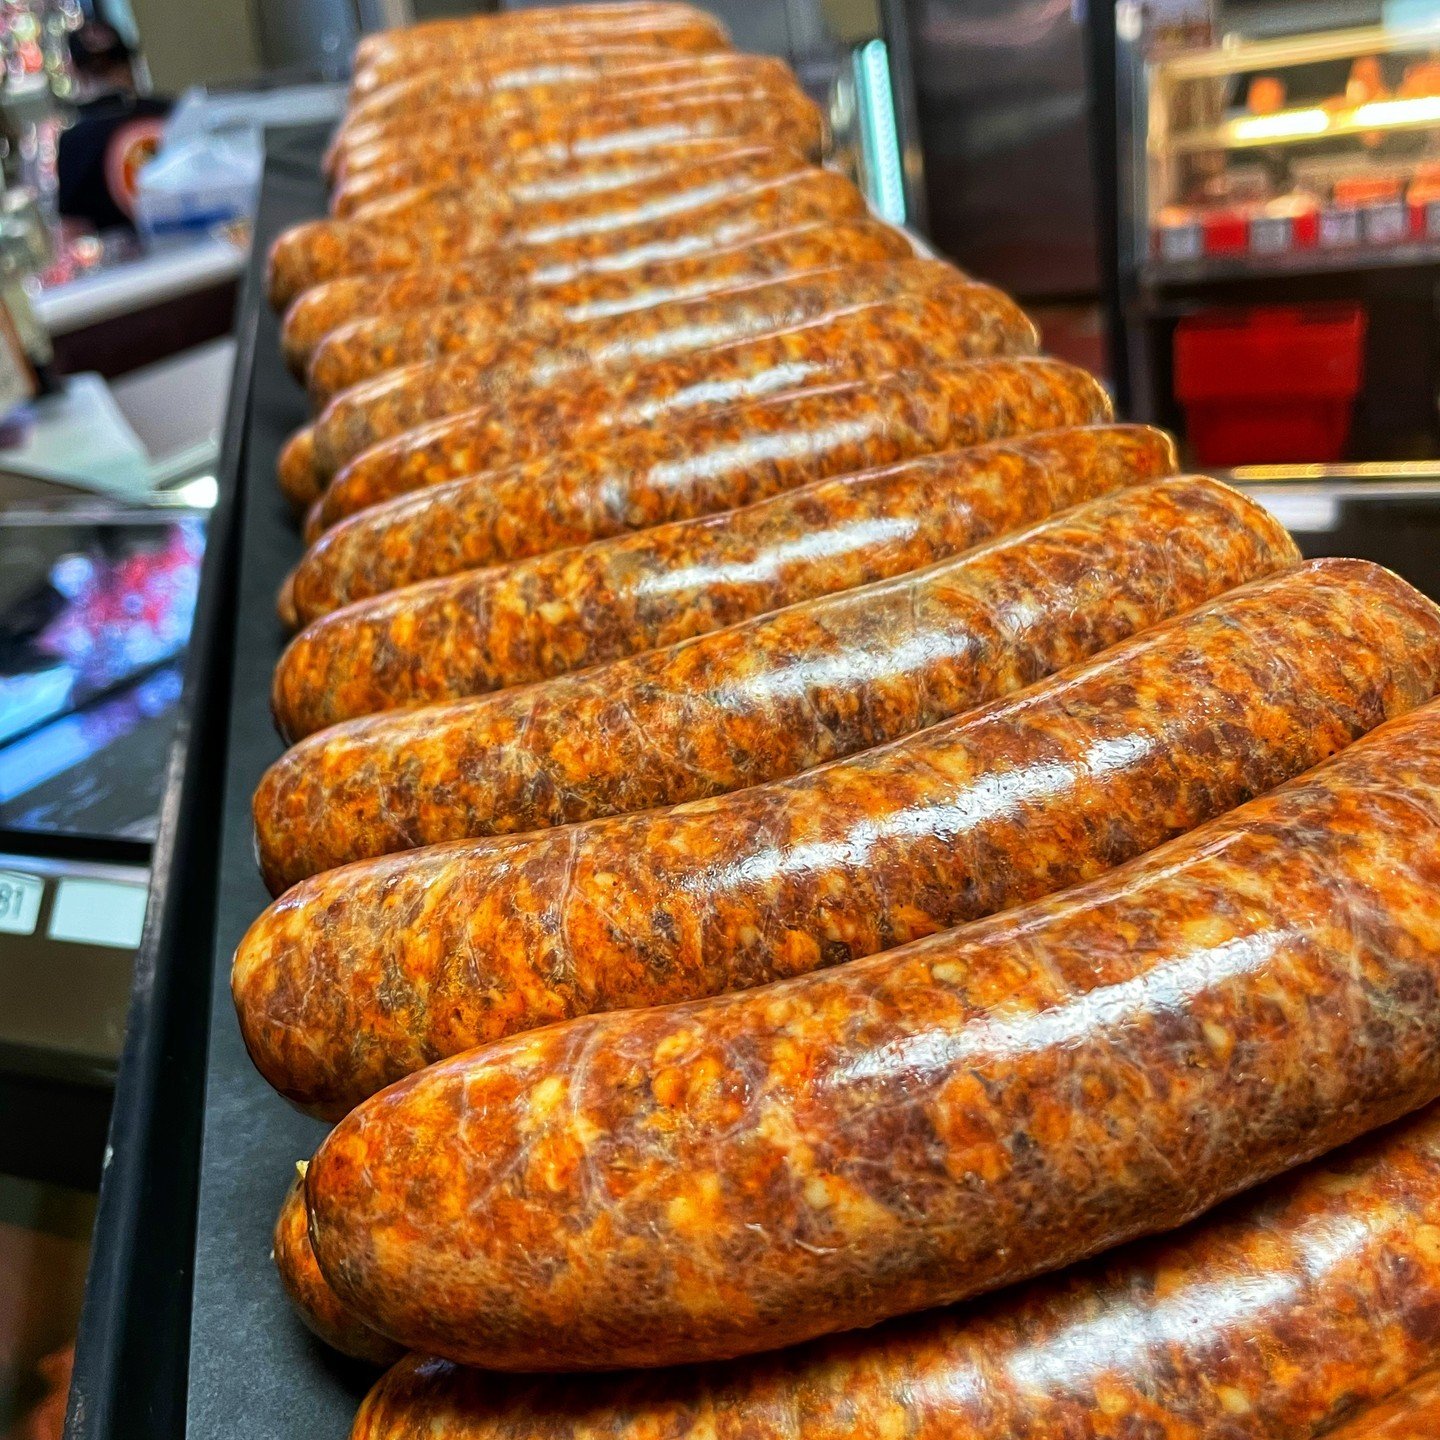 Sausage Passport Special! 

Mexican chorizo is in the case. Made with our great Berkshire pork, seasoning and spices, you&rsquo;ll find this sausage meatier and richer than most big brands. 

Great for breakfast, or grilled and served on a soft roll 